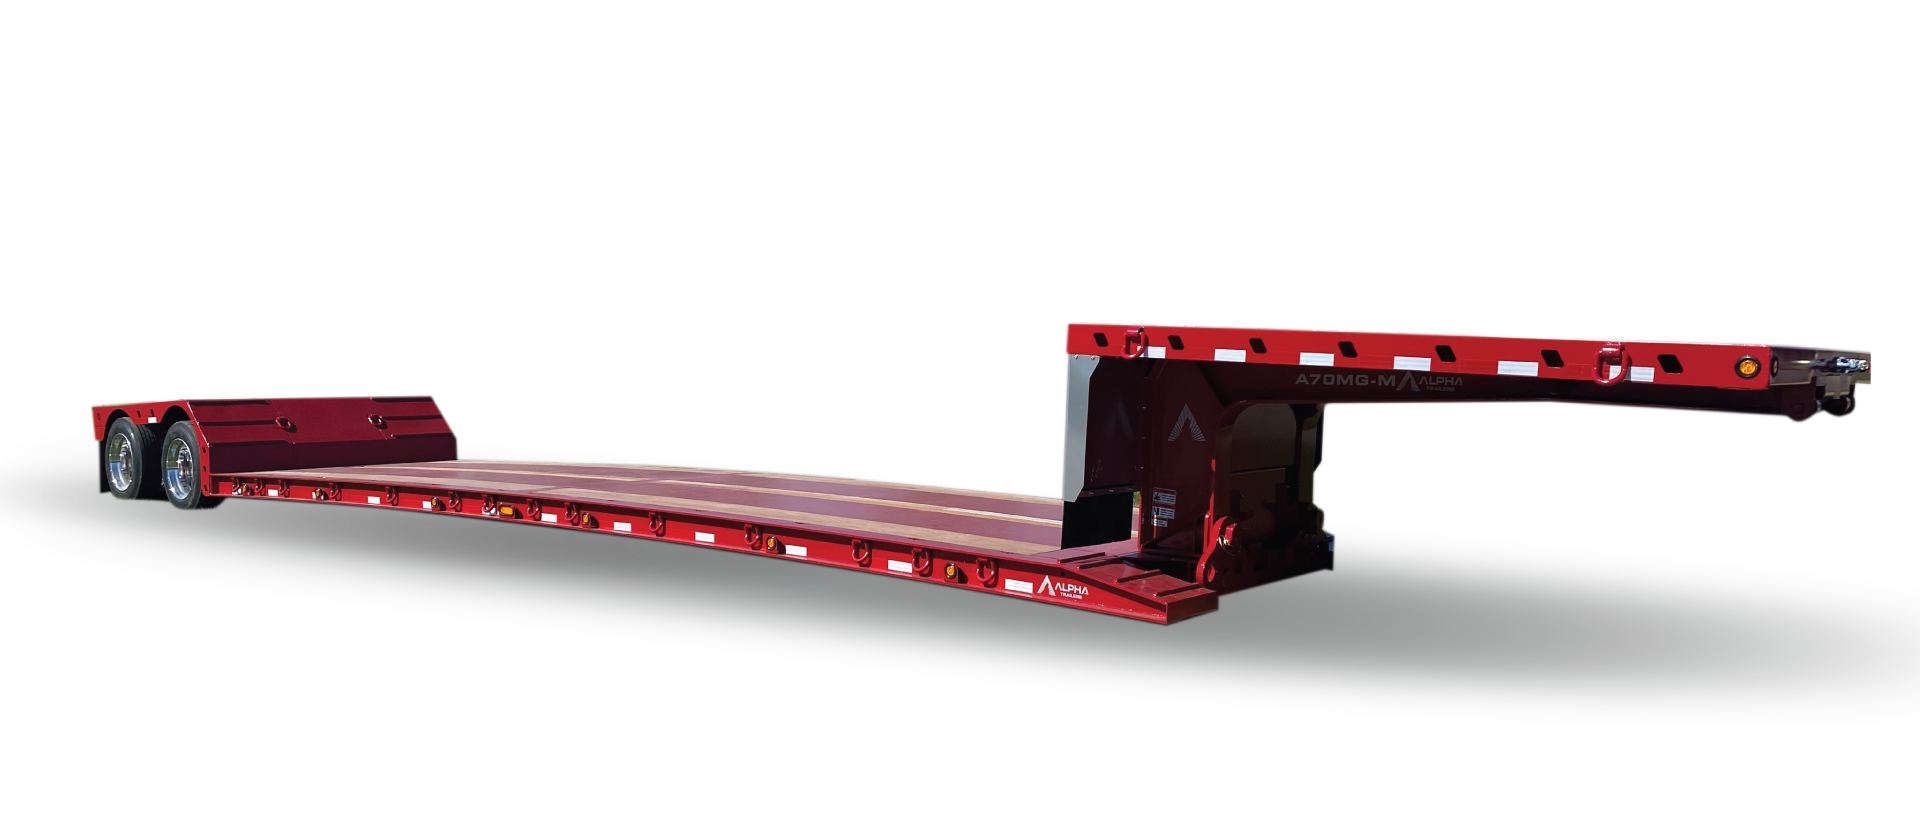 A 70MG-M heavy haul trailer manufactured by alpha hd trailers